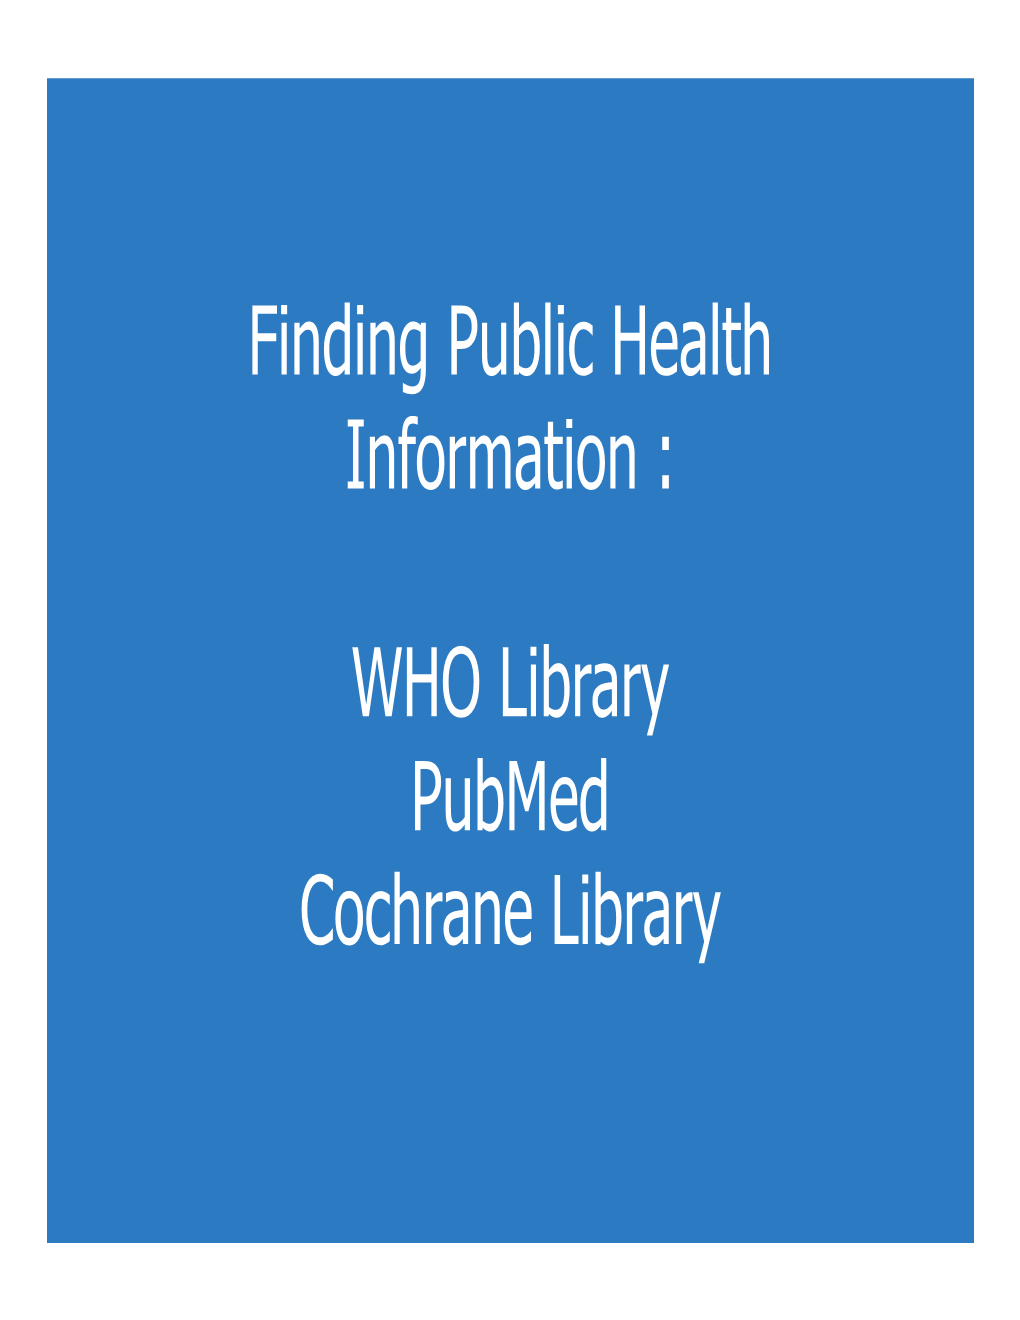 Finding Public Health Information : WHO Library Pubmed Cochrane